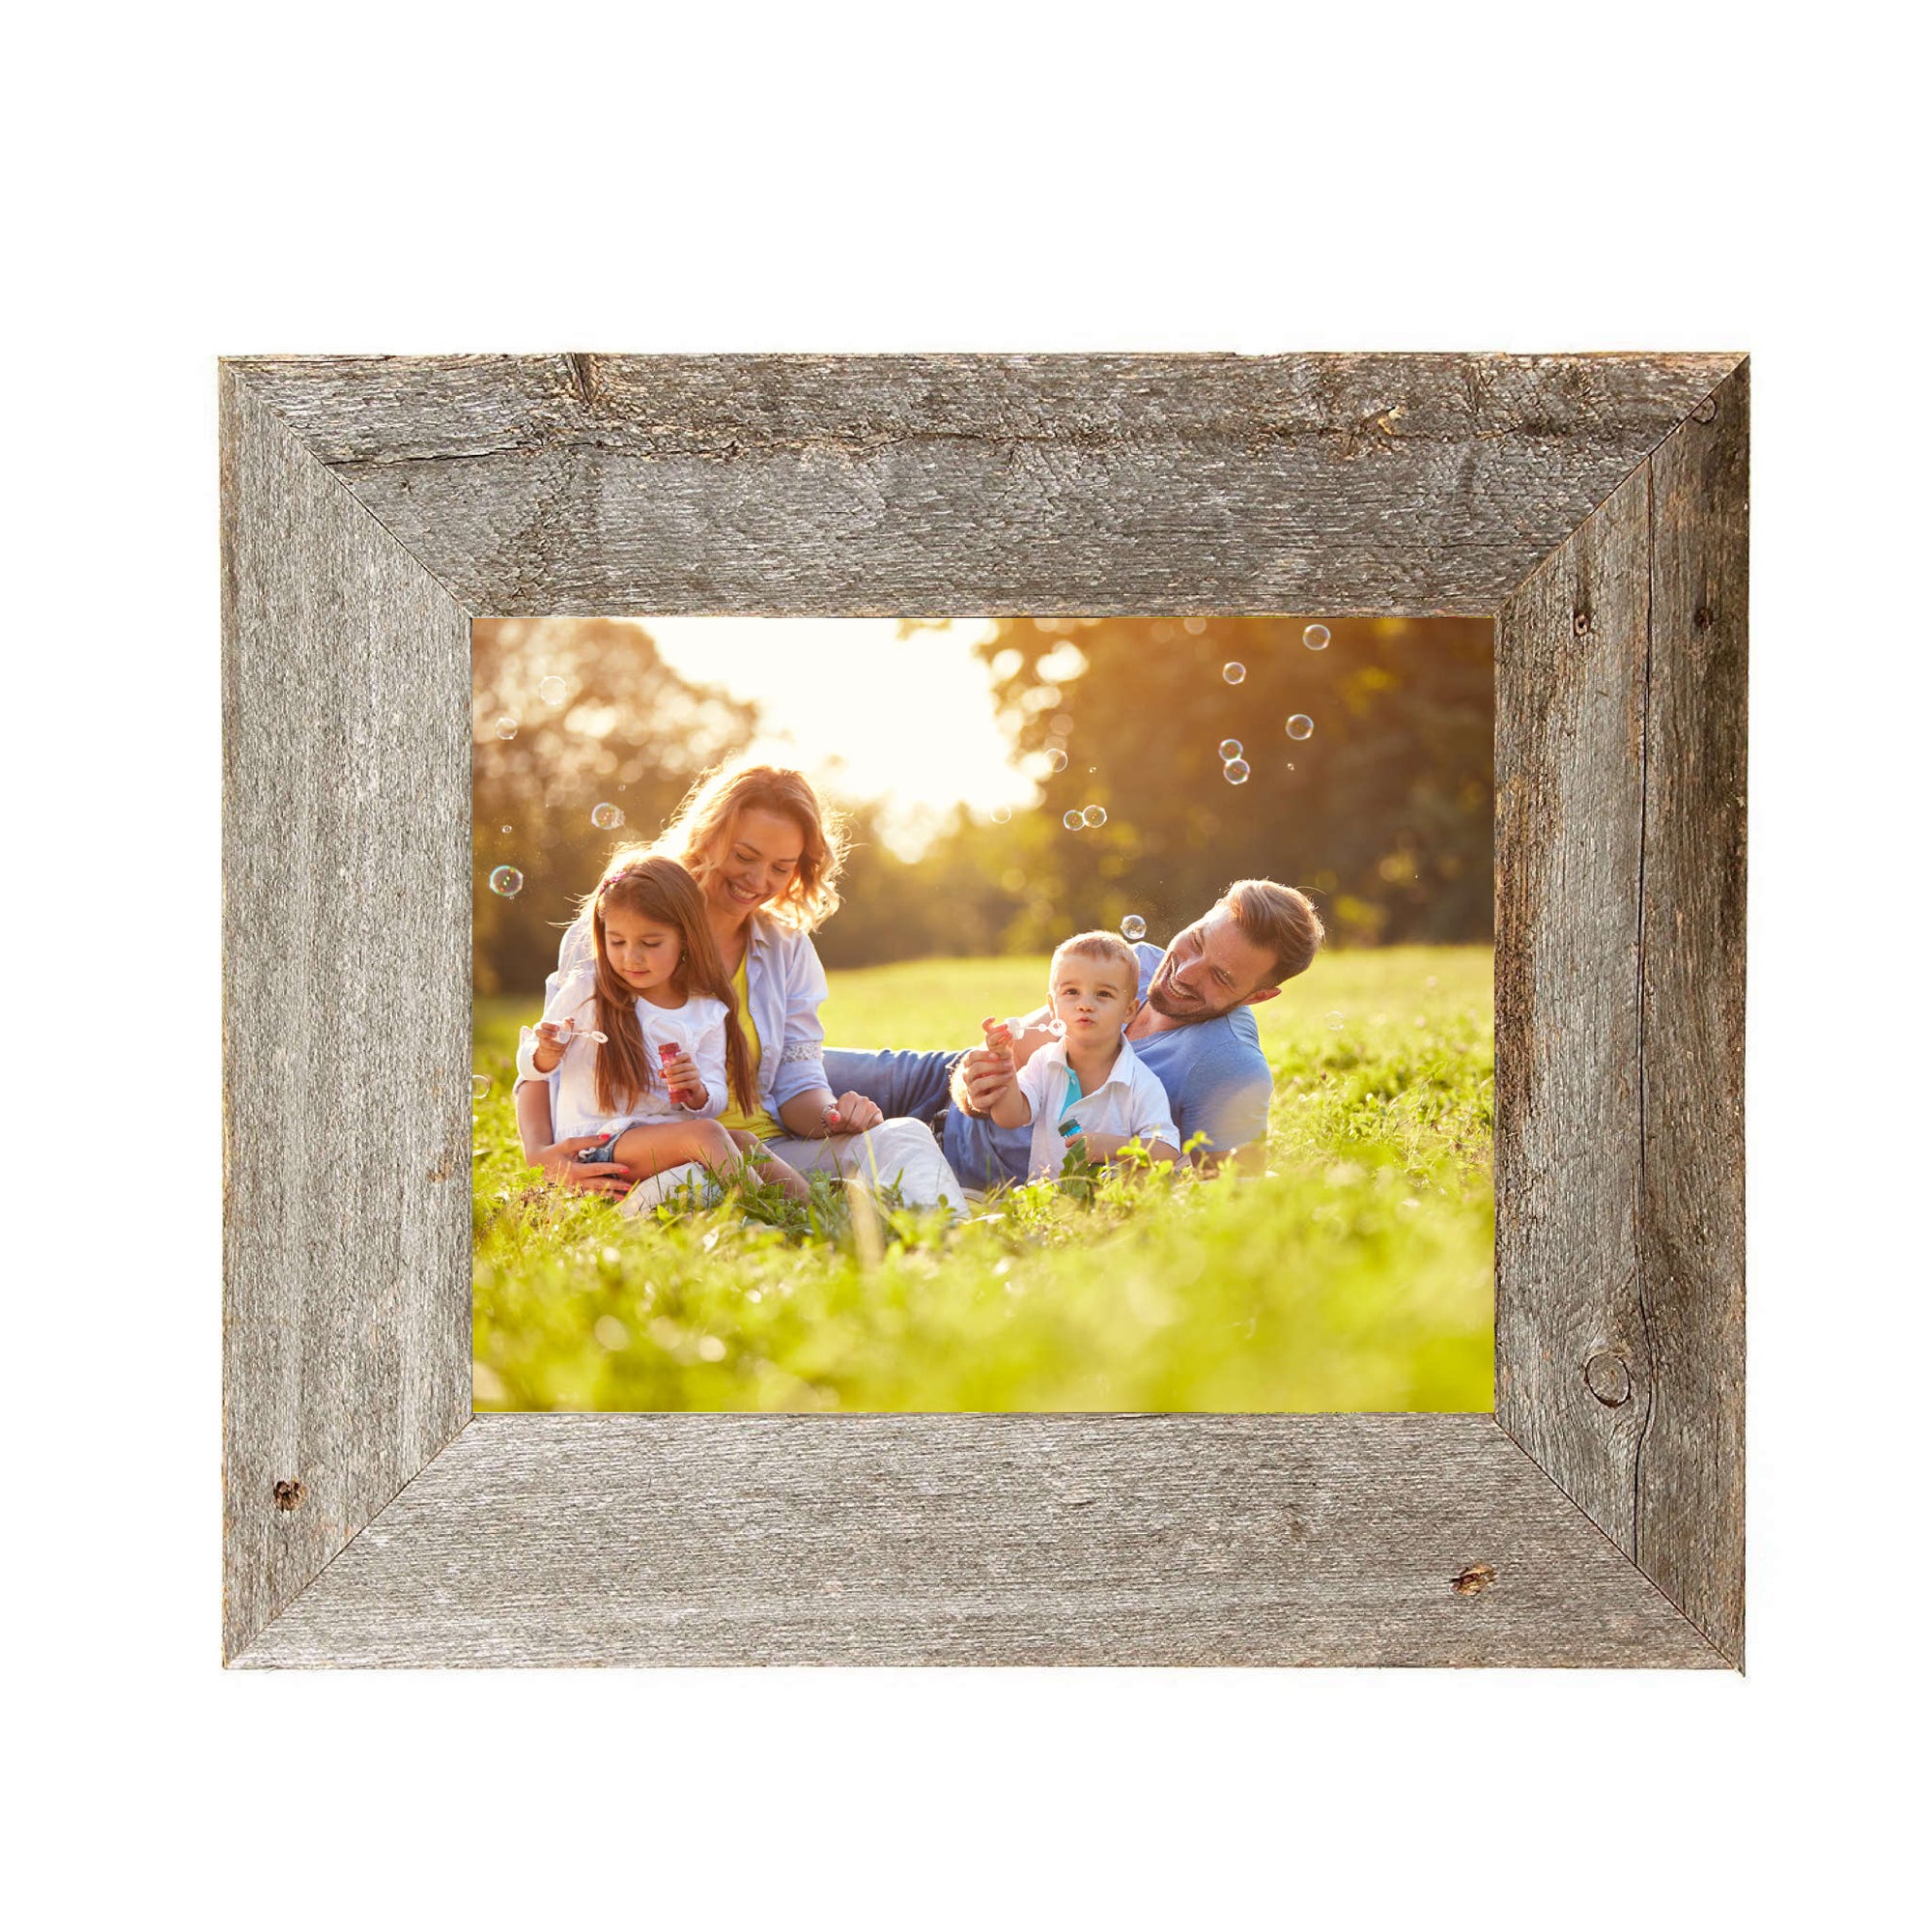 BarnwoodUSA Rustic Farmhouse Signature Series 20 inch x 30 inch Espresso Reclaimed Wood Picture Frame, Size: 20 x 30, Brown